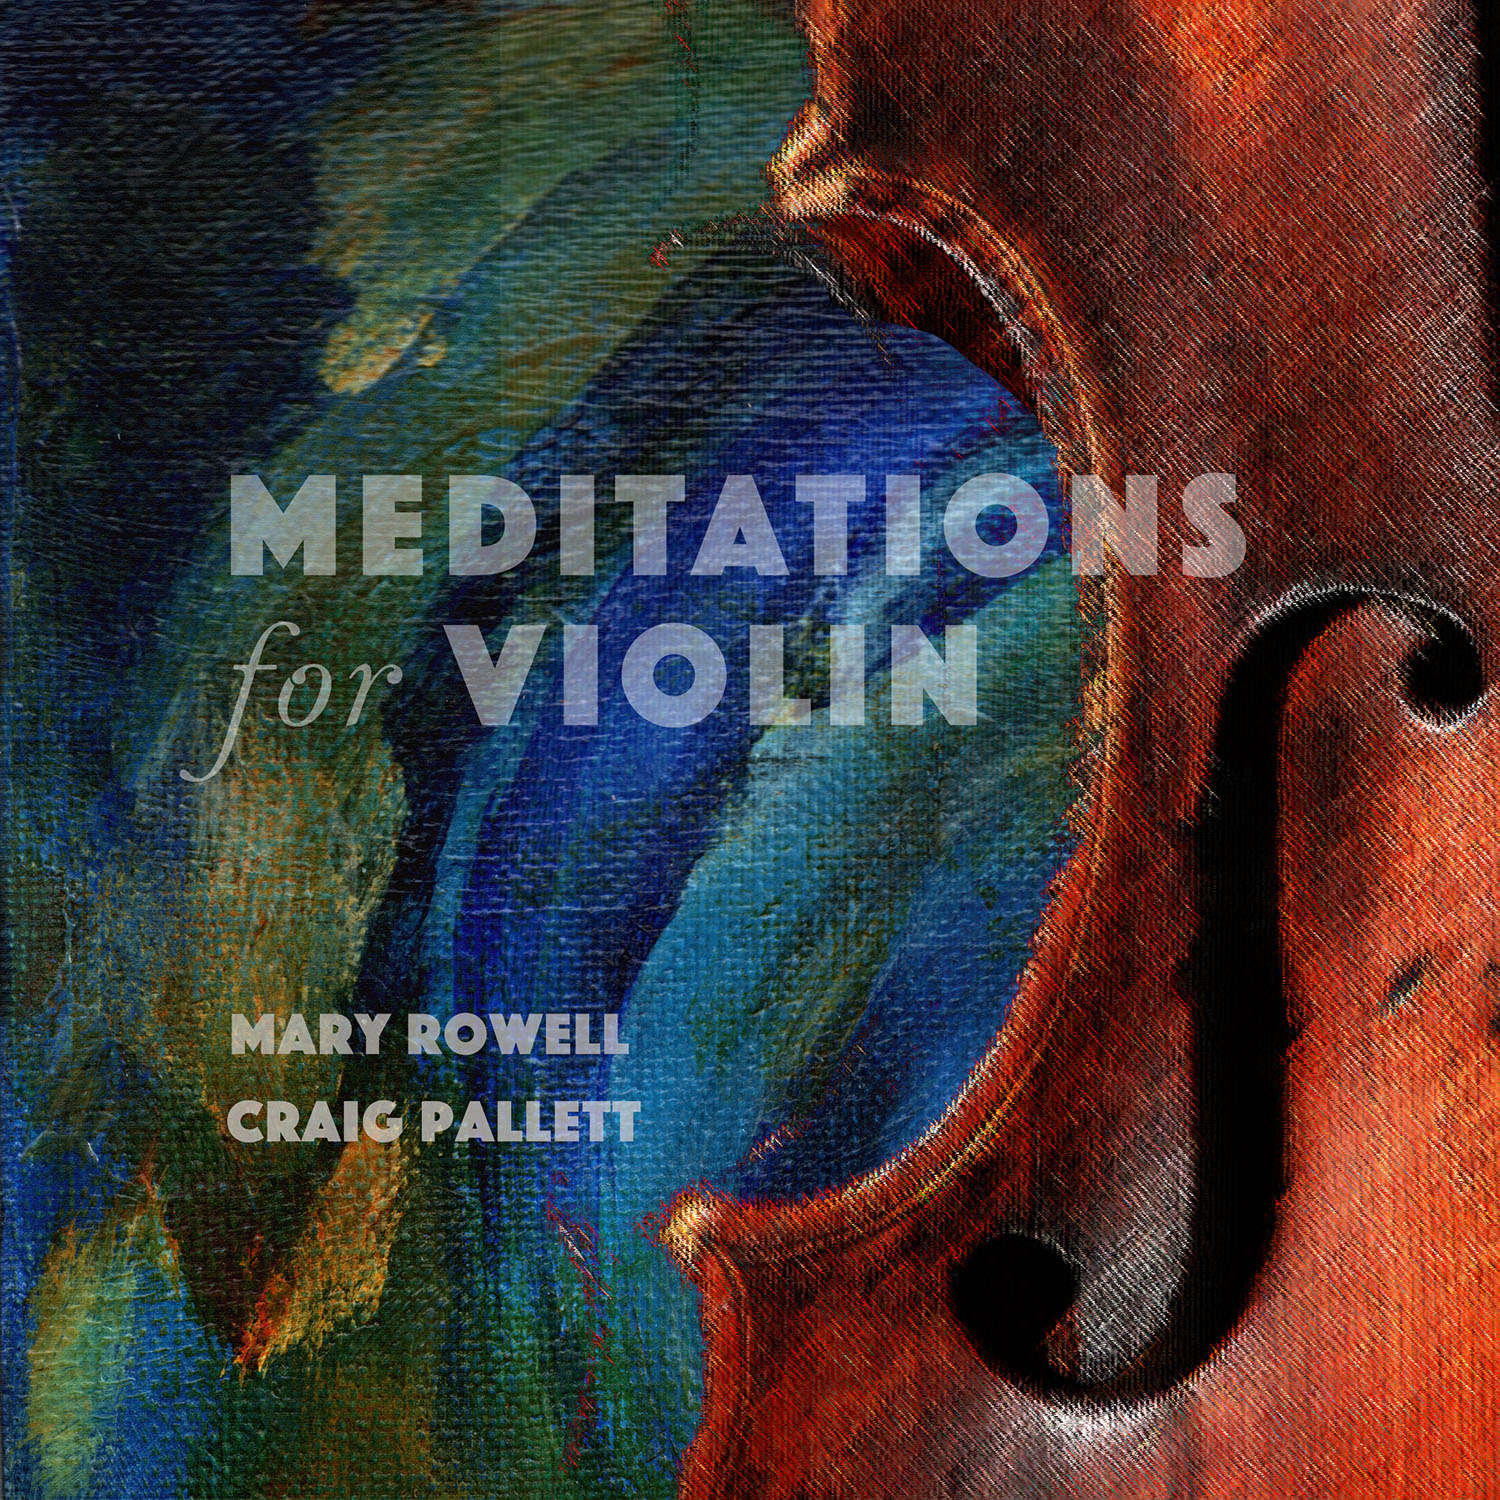 Meditations for Violin TURNmusic Release Party Video